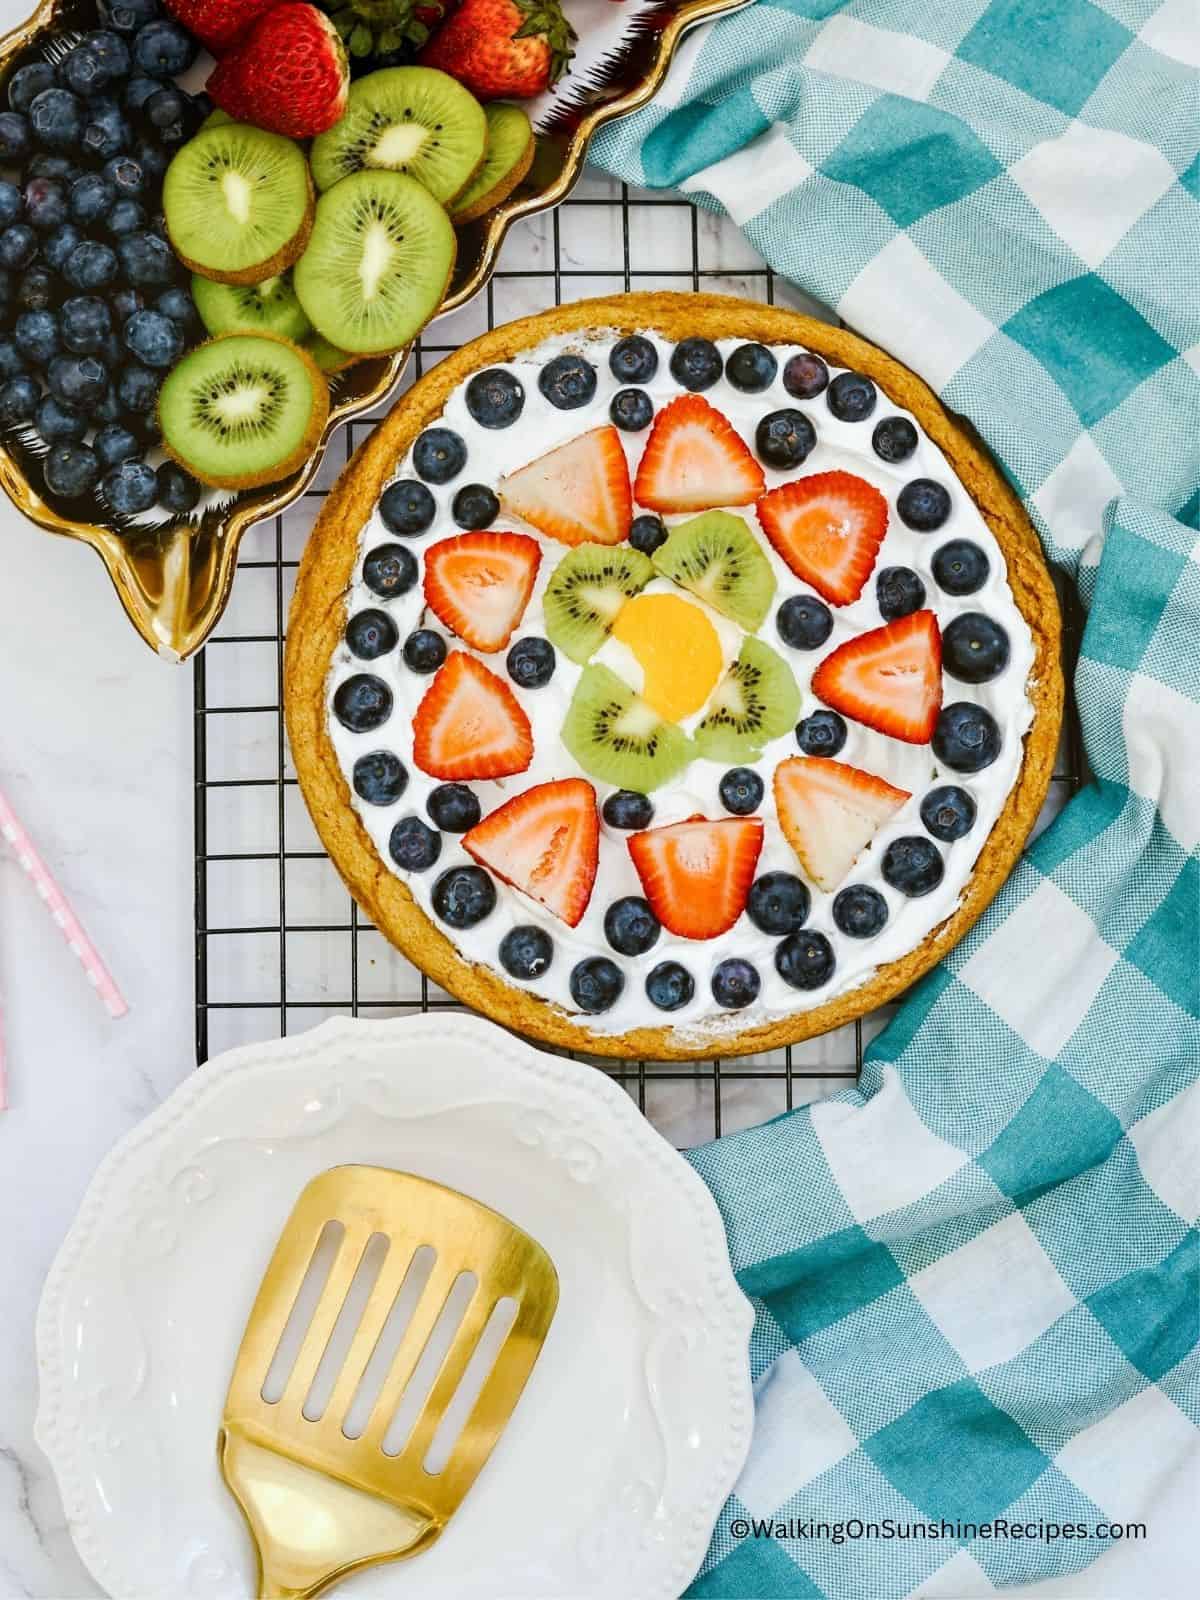 Pizza made with cookie dough and topped with strawberries, blueberries, kiwi and oranges.